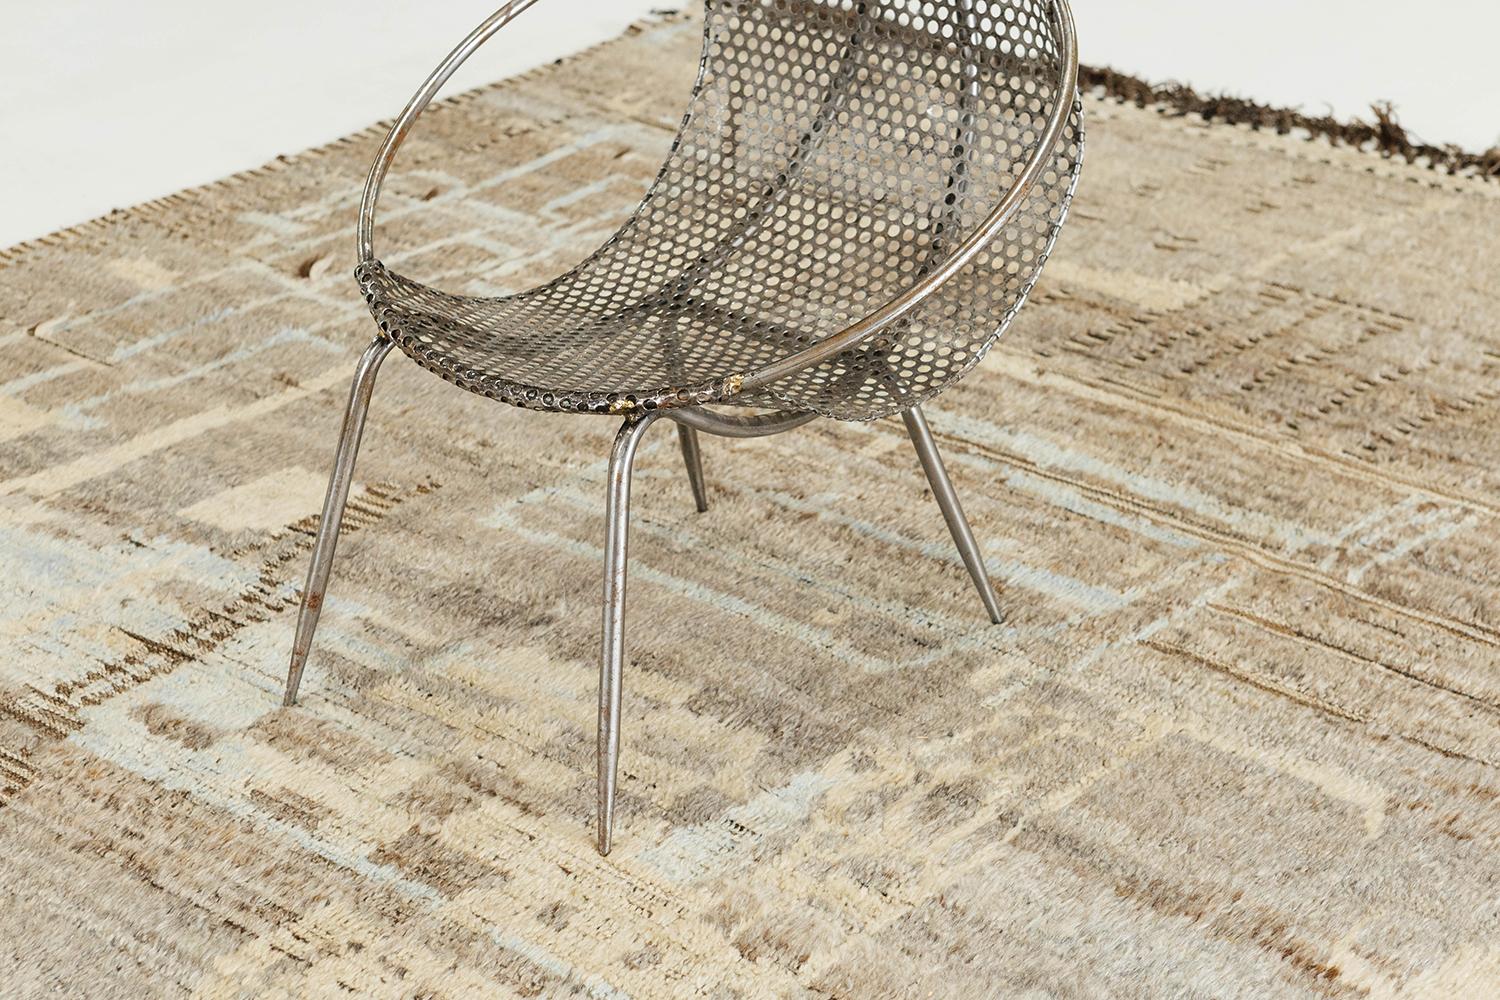 Meliska' is a beautifully textured rug with irregular motifs inspired from the Atlas Mountains of Morocco. Softened earth tones work cohesively to make for a great contemporary interpretation for the modern design world. Mehraban's Atlas collection